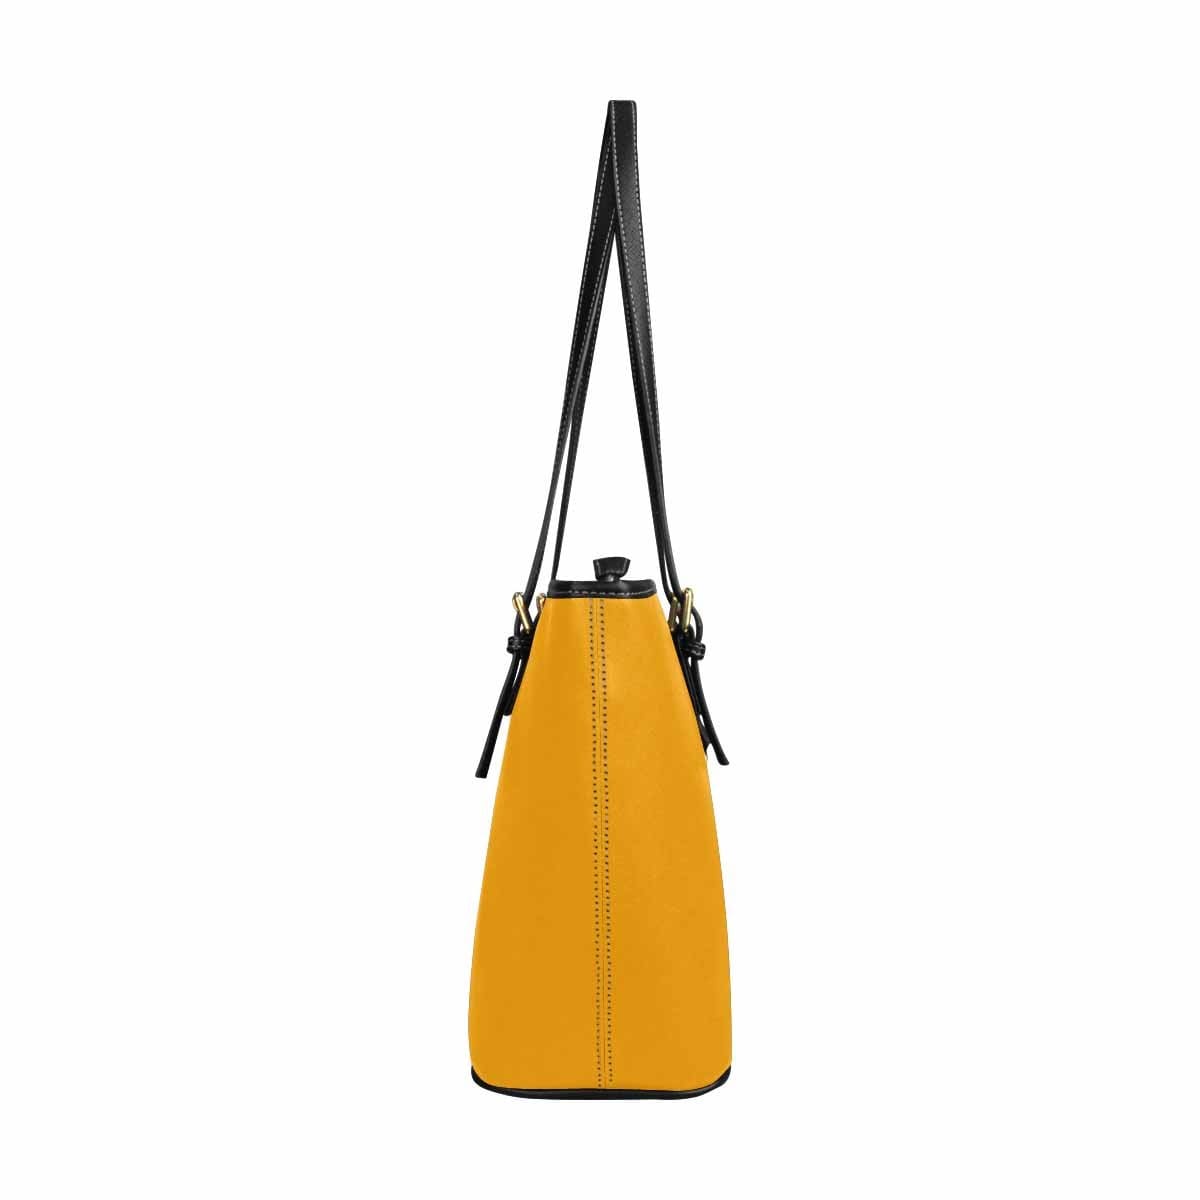 Large Leather Tote Shoulder Bag - Bright Orange - Bags | Leather Tote Bags